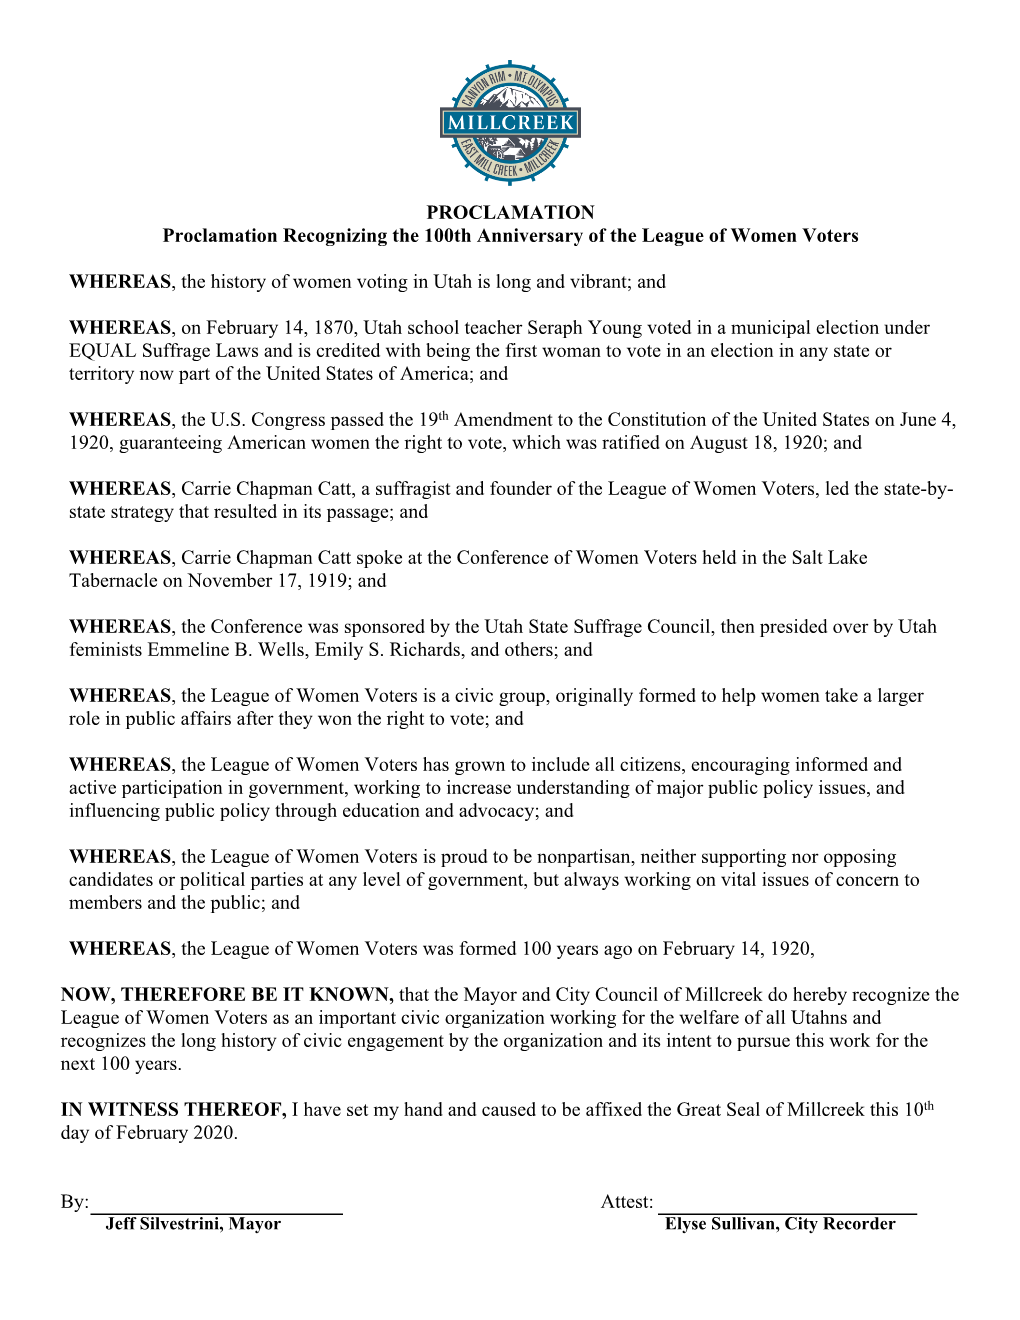 Proclamation Recognizing the League of Women Voters 100Th